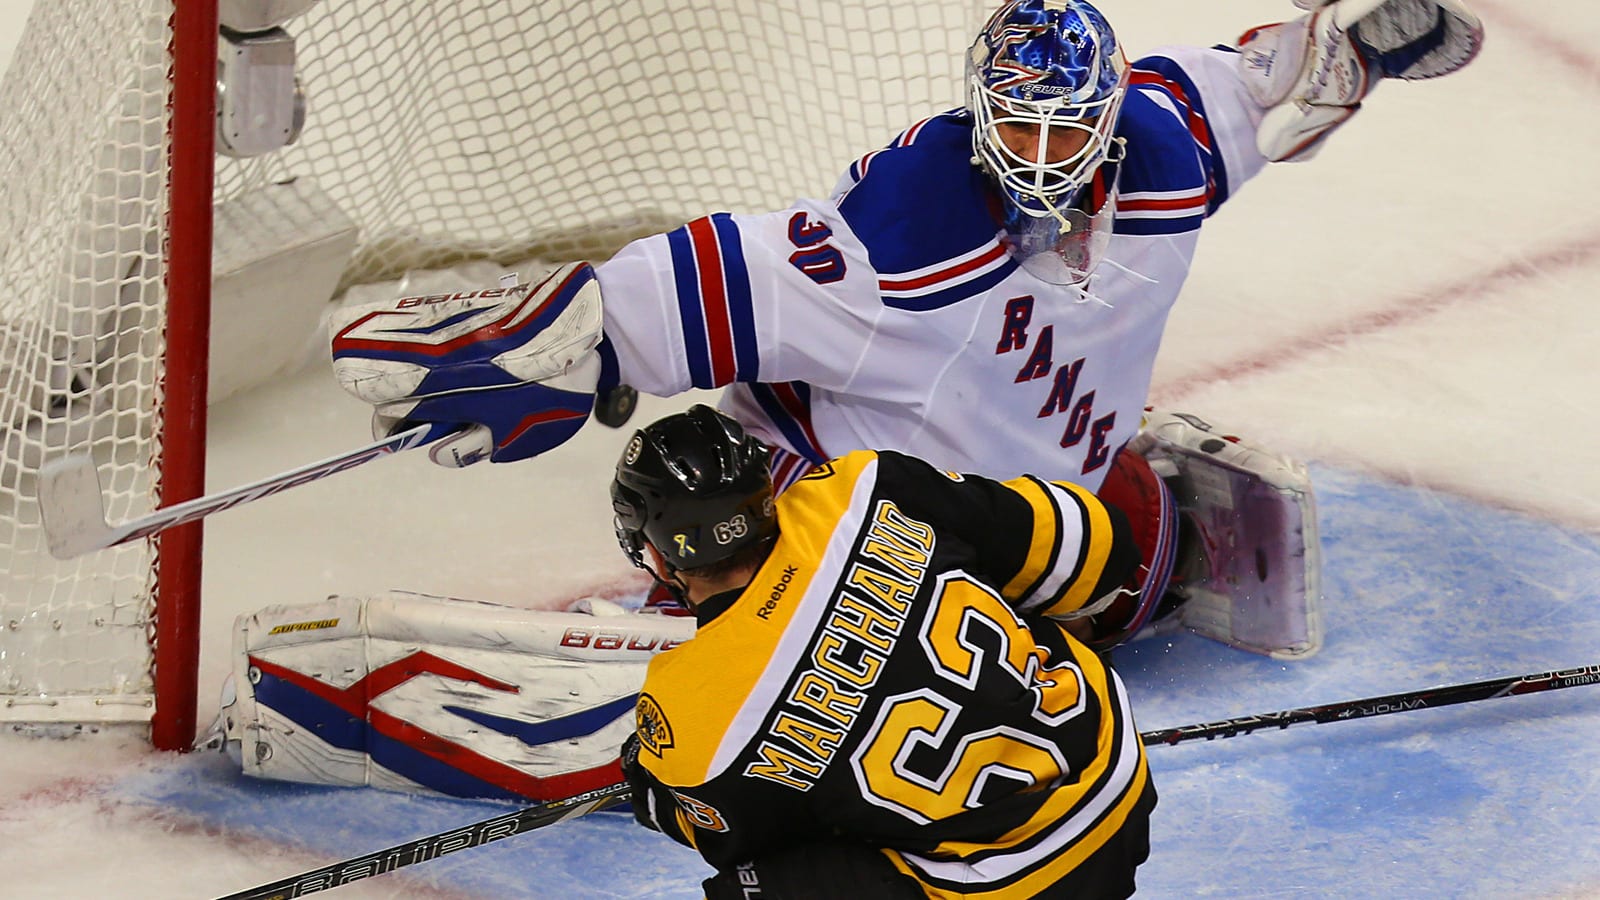 Will verbal war fuel ill will between Bruins and Rangers?